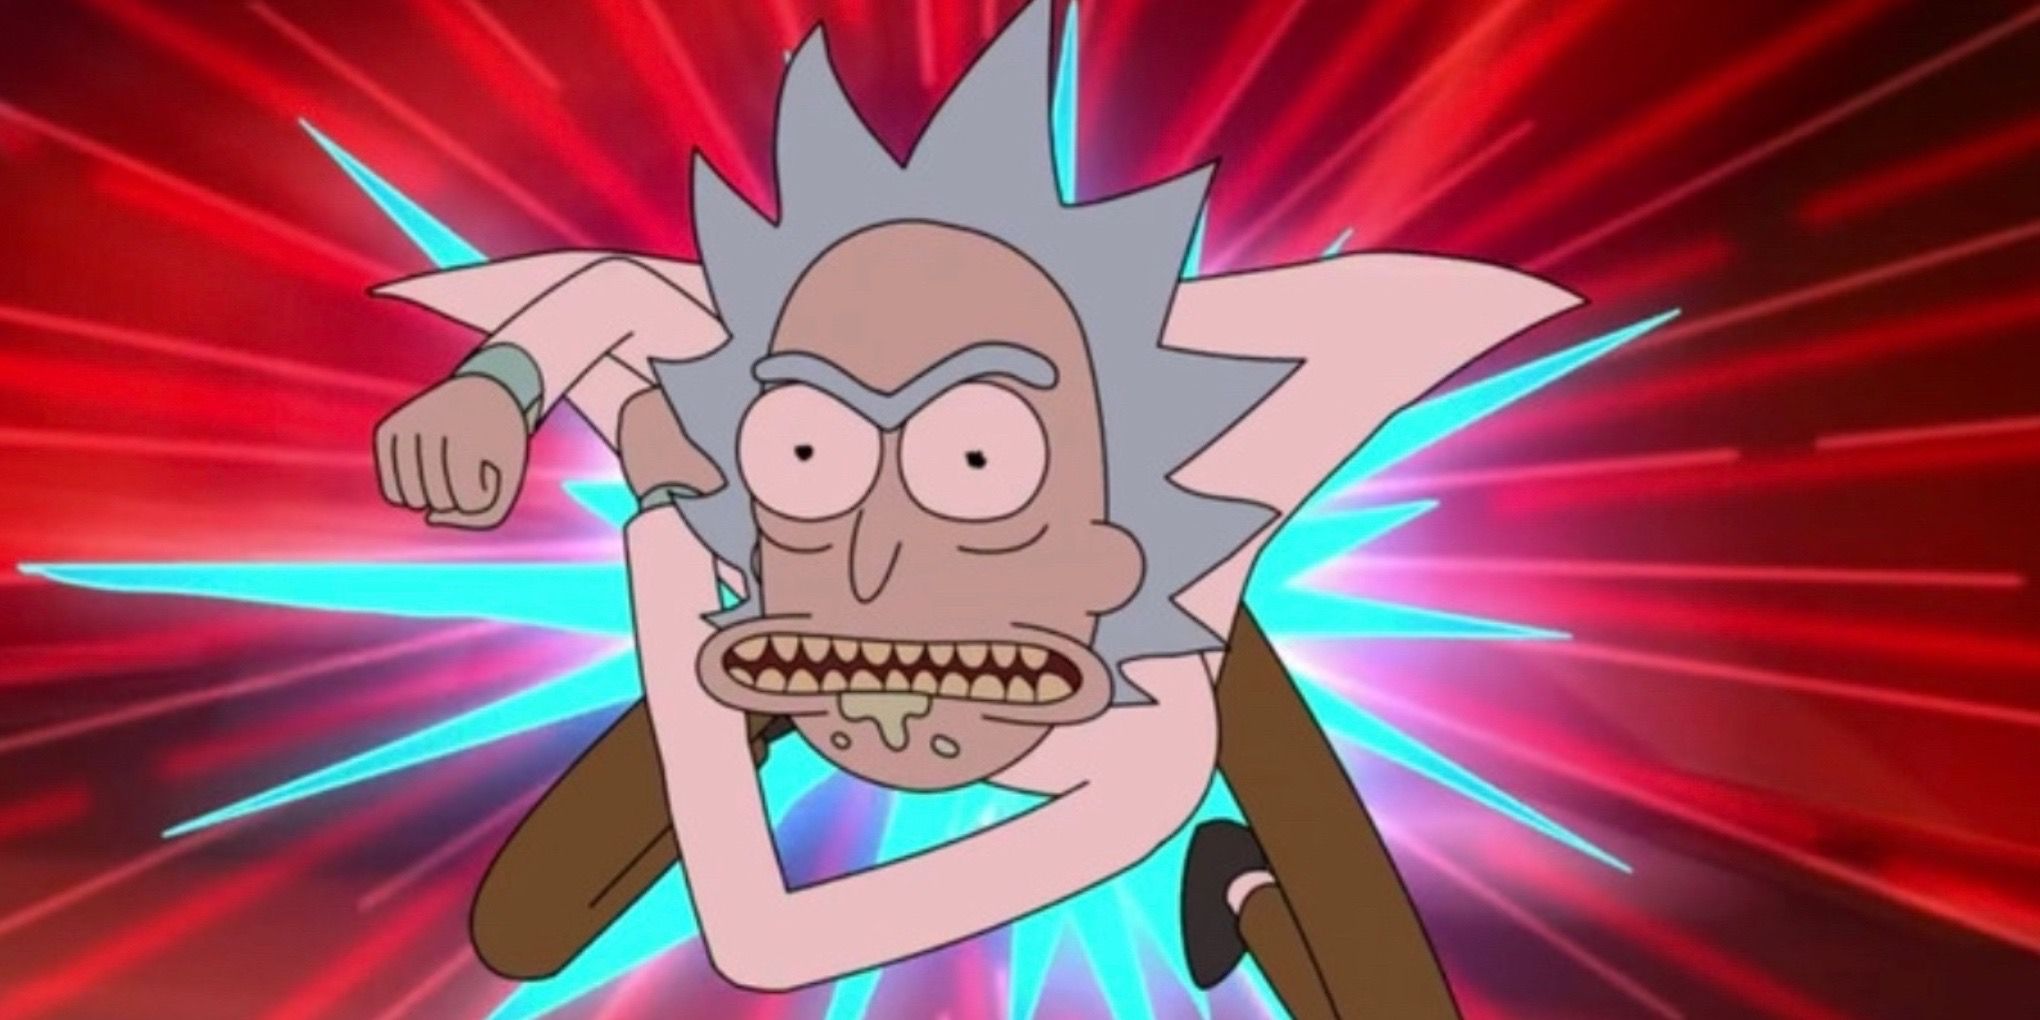 Rick Sanchez traveling in space on Rick and Morty